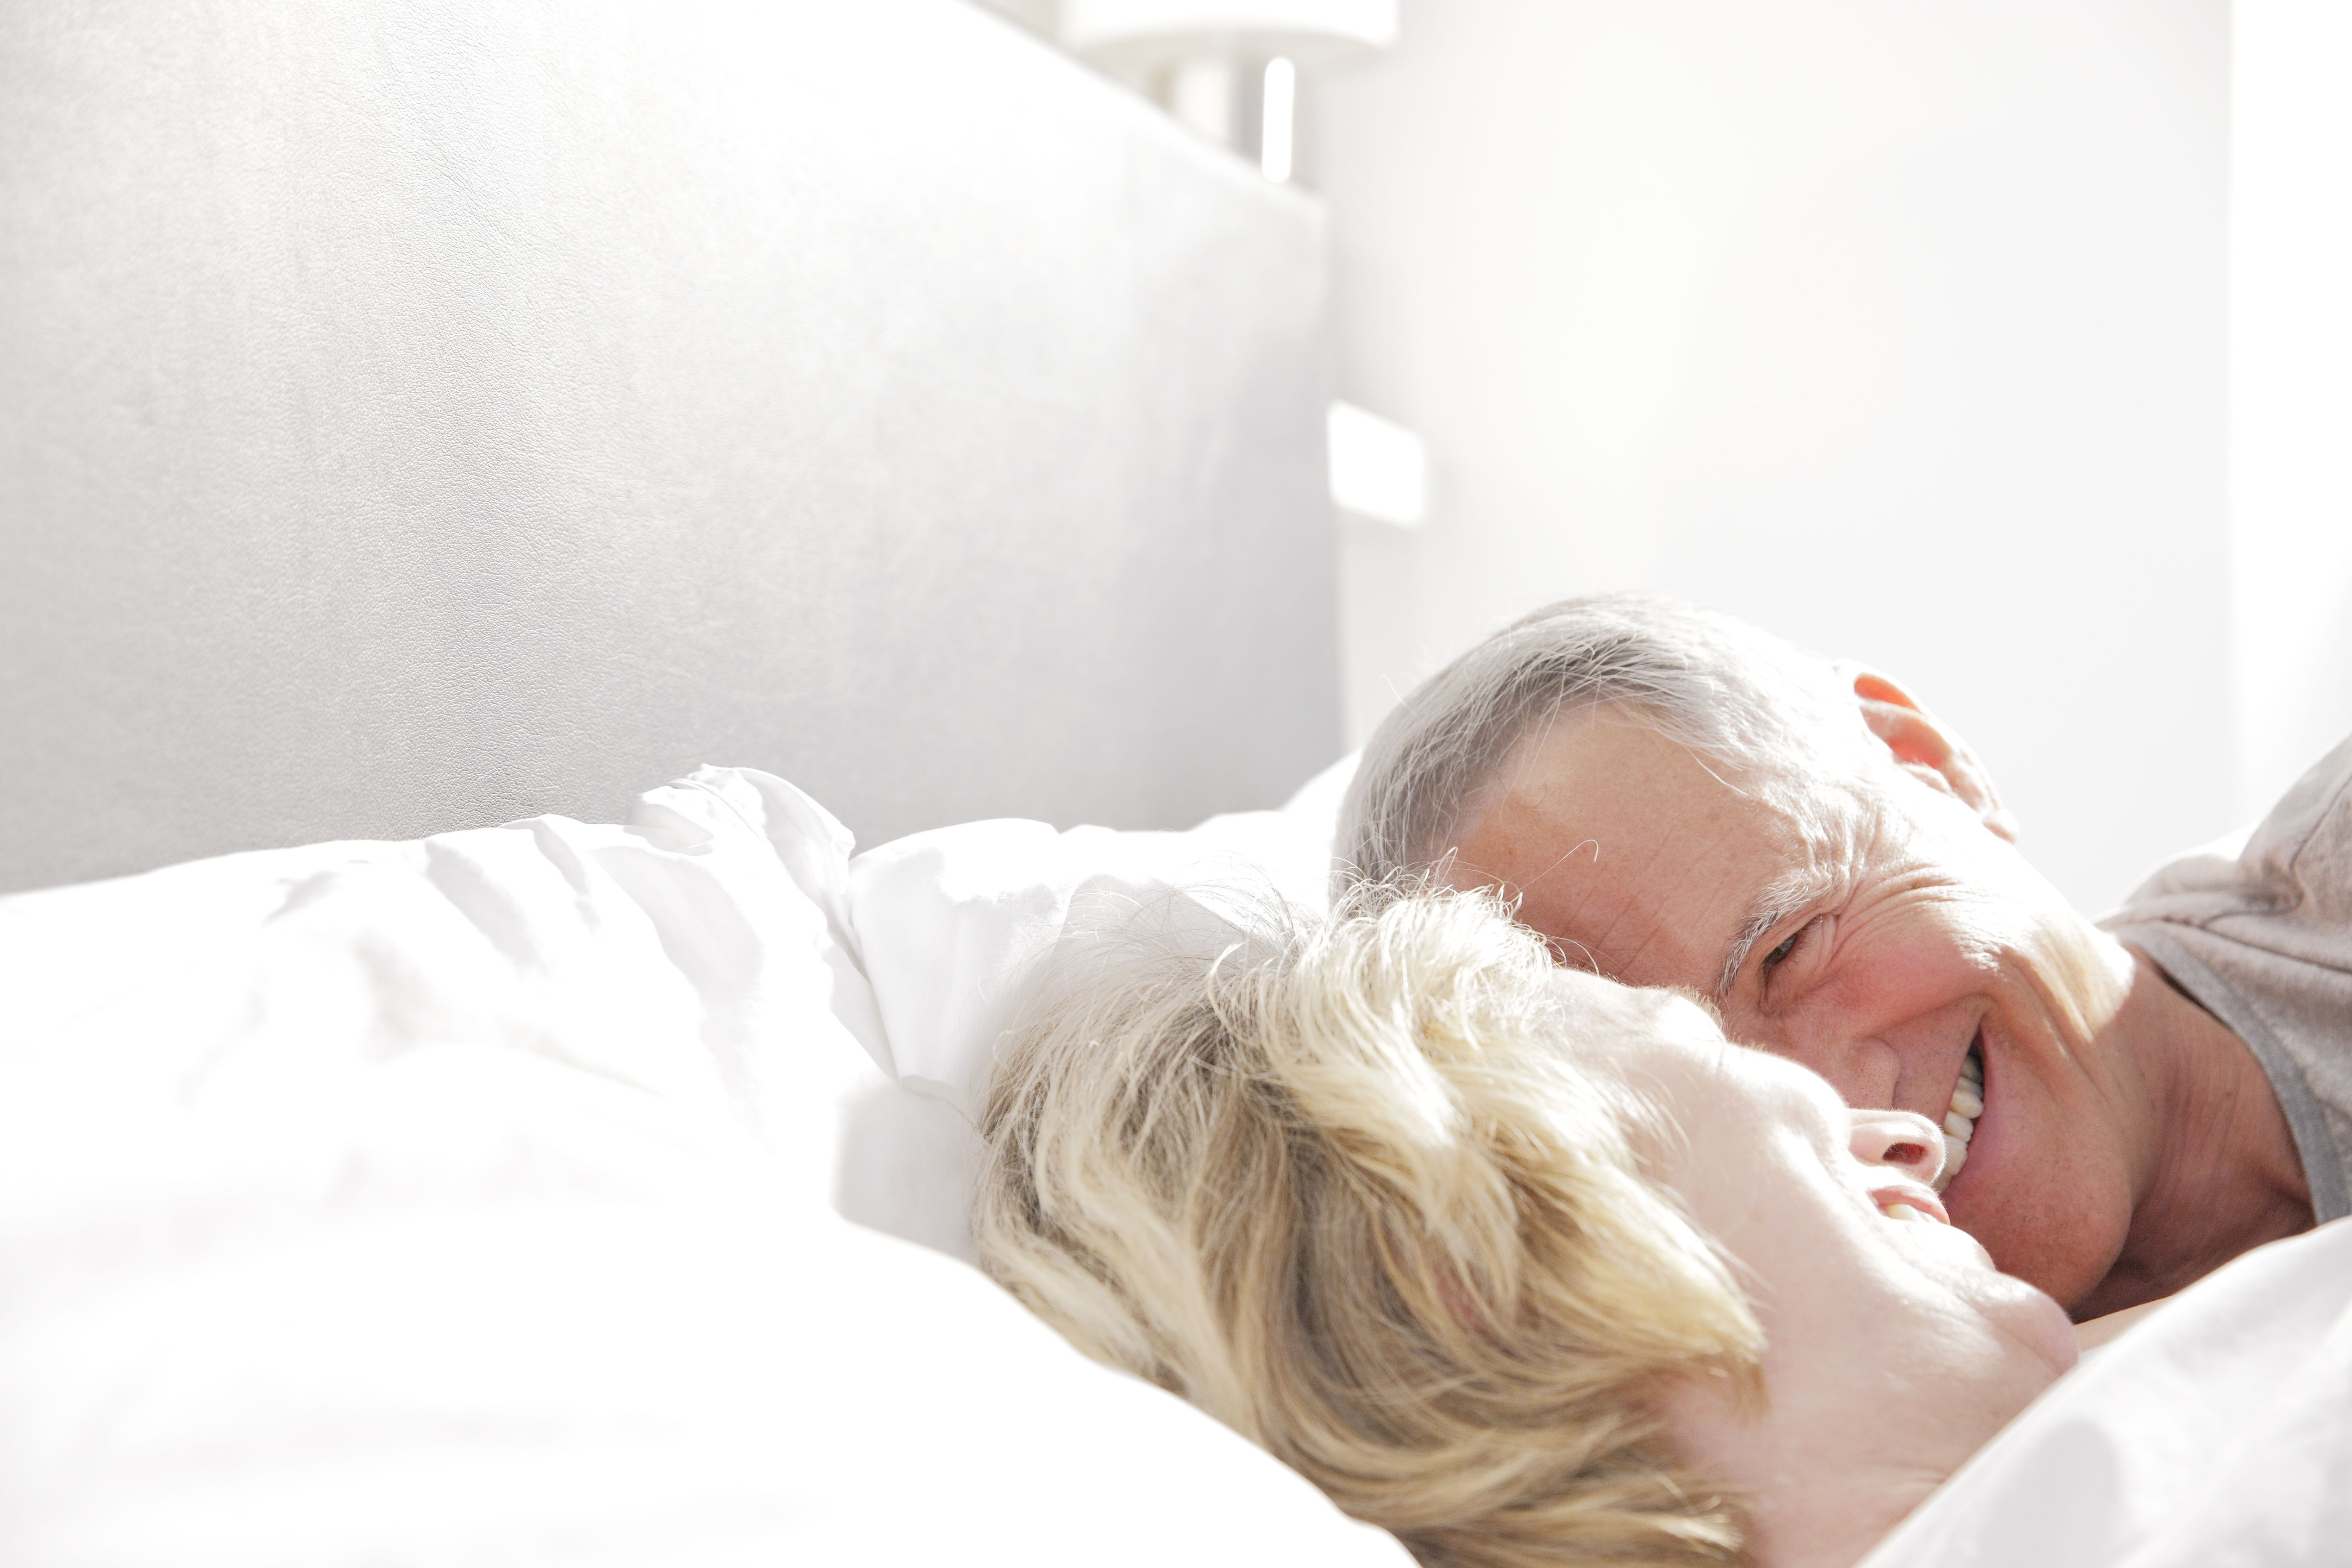 A Urologist Shared 8 Tips for Having Great Sex Over the Age of 50 photo